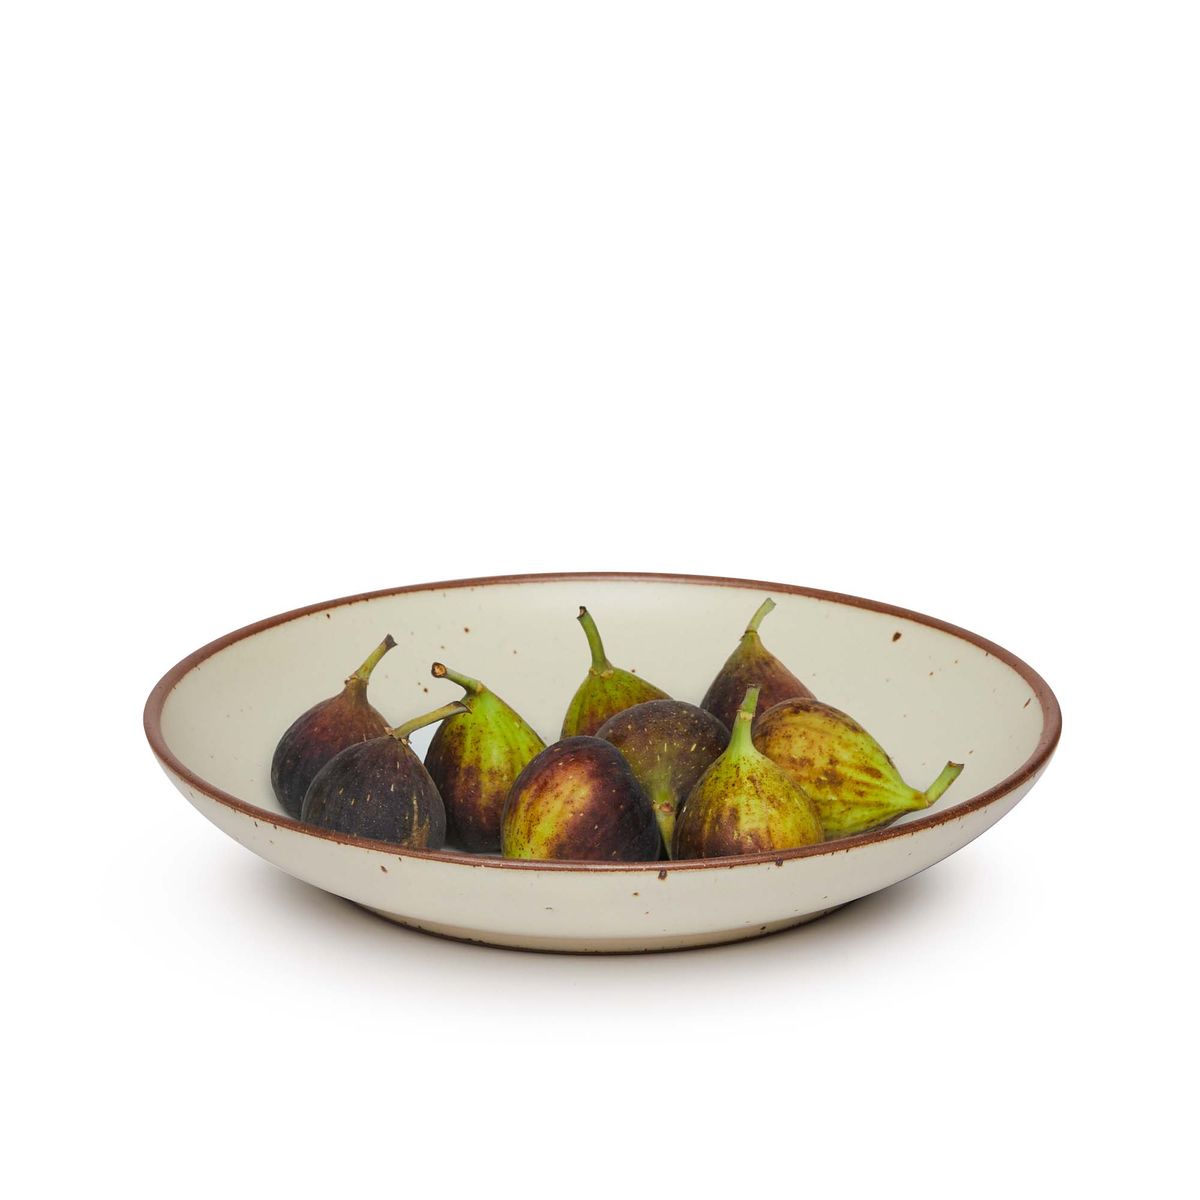 Figs on a large ceramic plate with a curved bowl edge in a warm, tan-toned, off-white color featuring iron speckles and an unglazed rim.